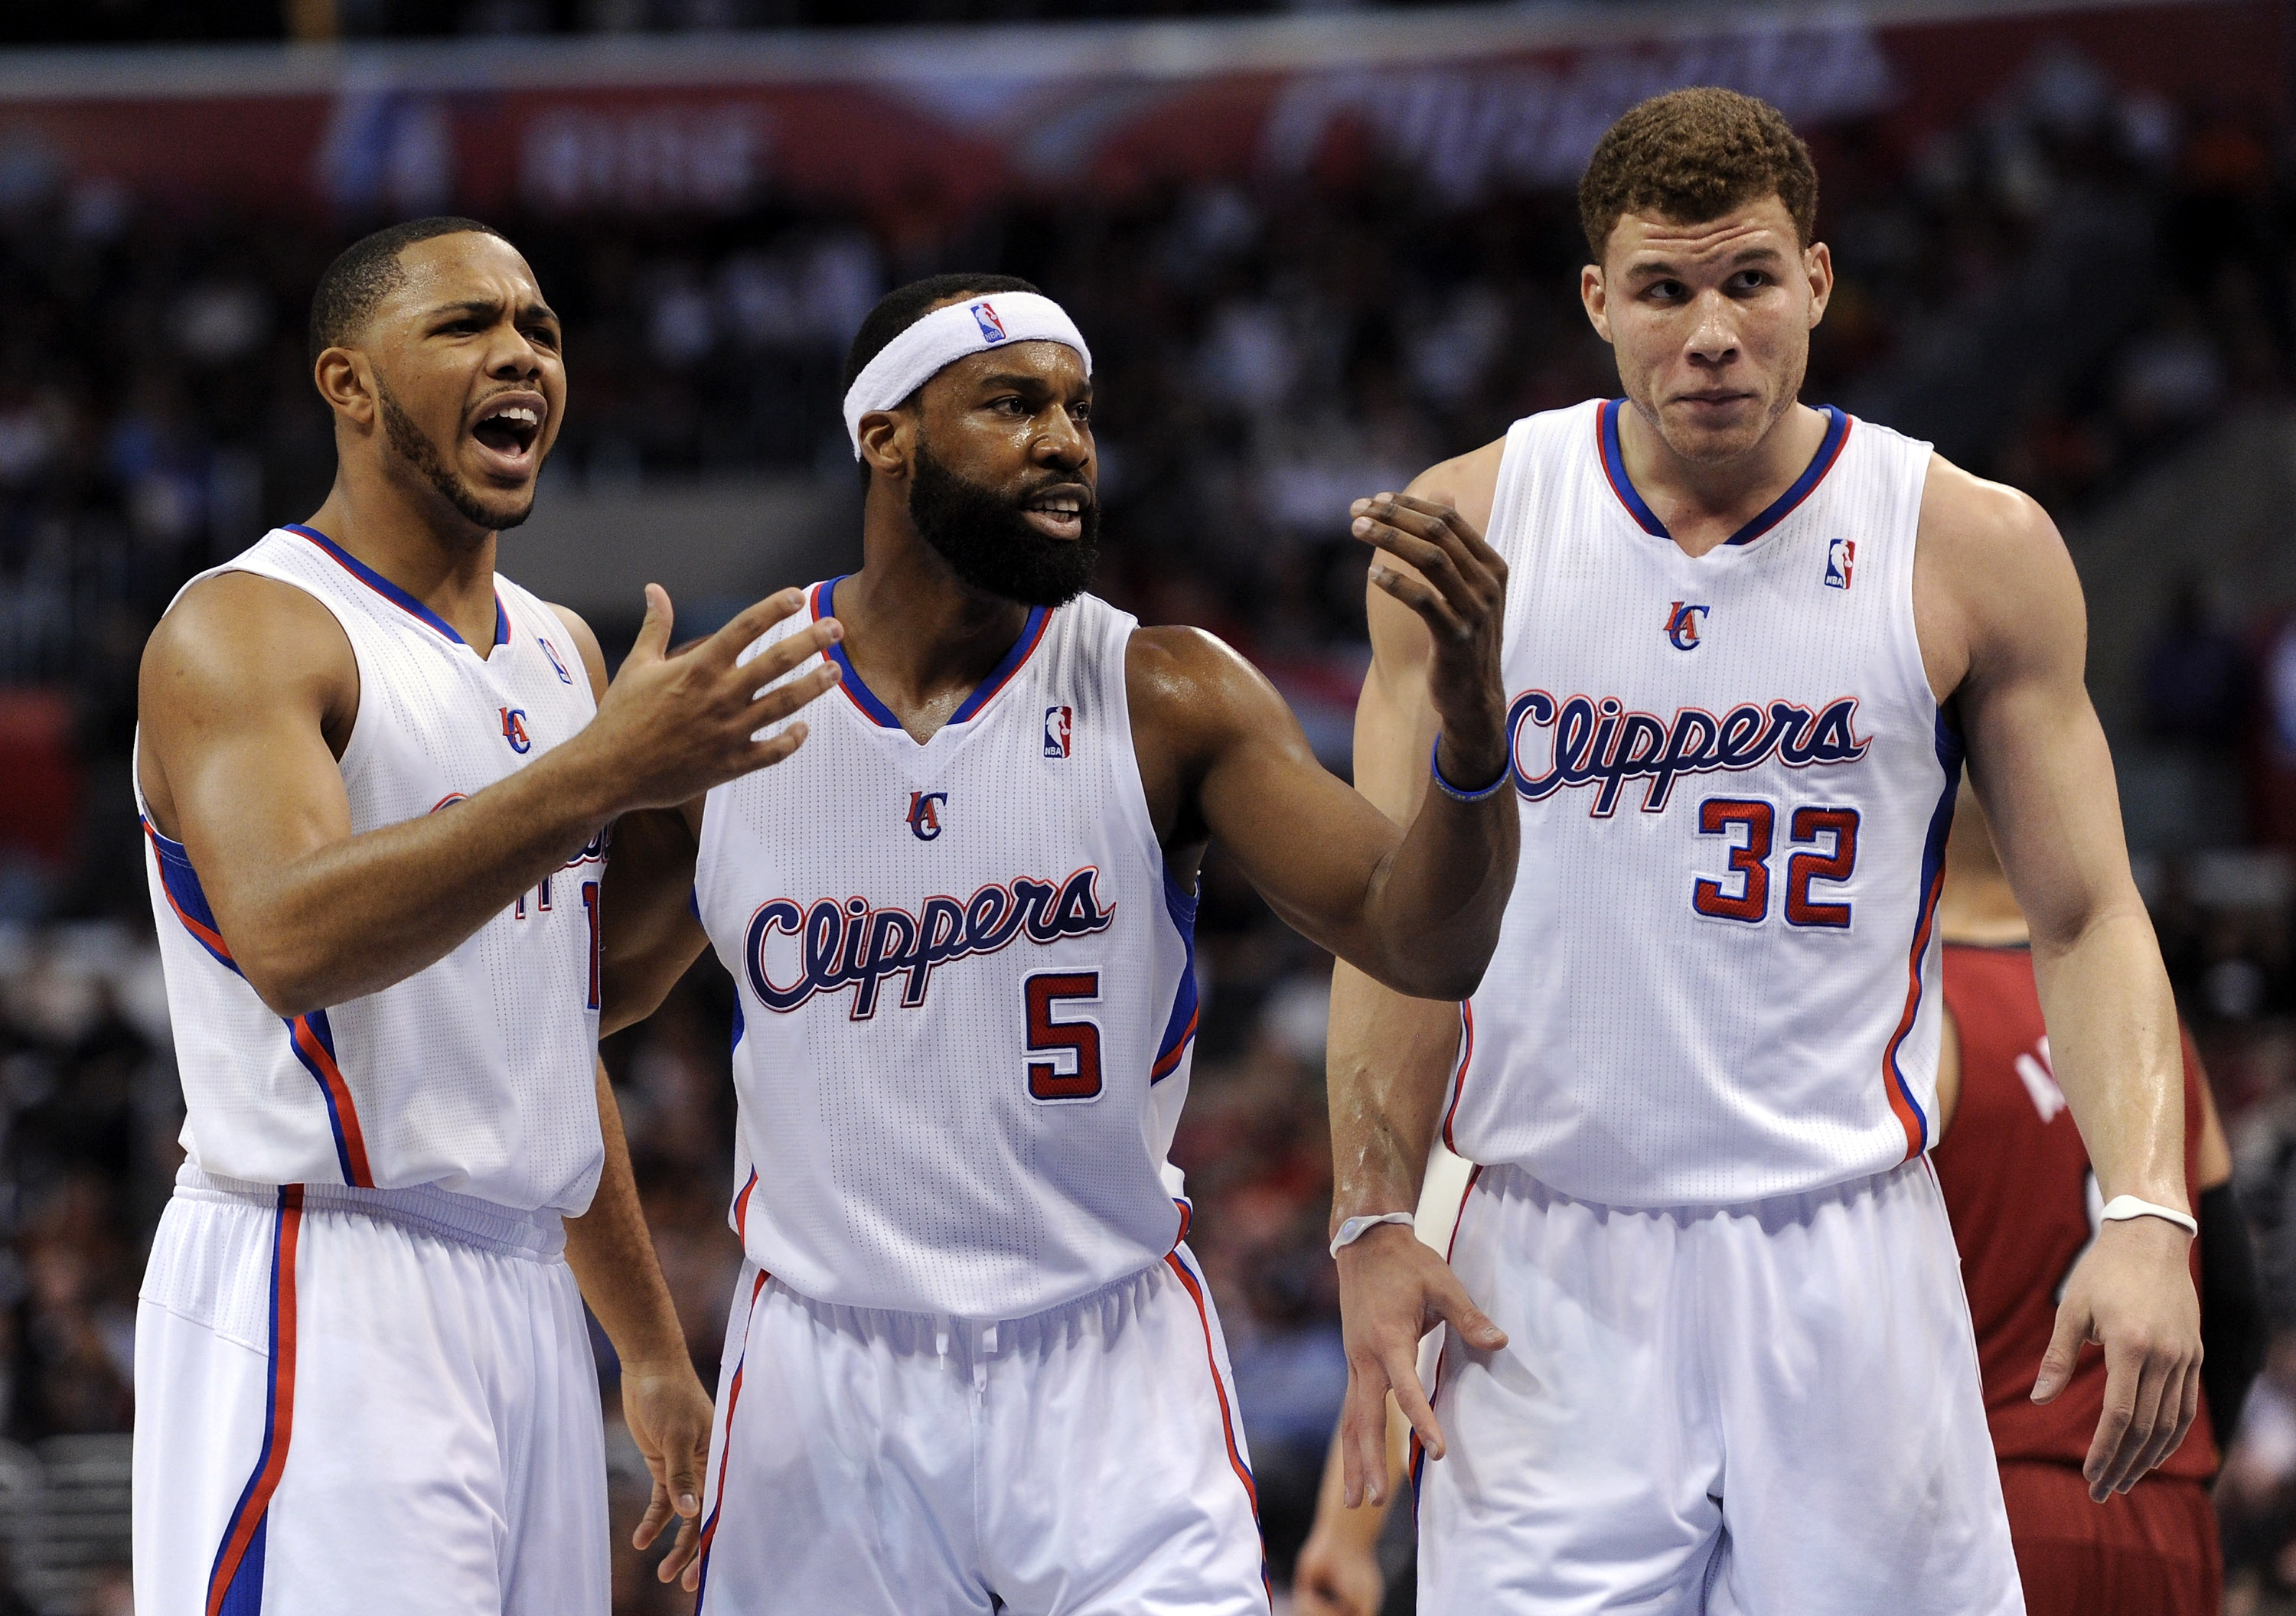 LOS ANGELES, CA - JANUARY 12:  Baron Davis #5, Eric Gordon #10 and Blake Griffin #32 of the Los Angeles Clippers react after a foul during the game against the Miami Heat at the Staples Center on January 12, 2011 in Los Angeles, California.  NOTE TO USER: